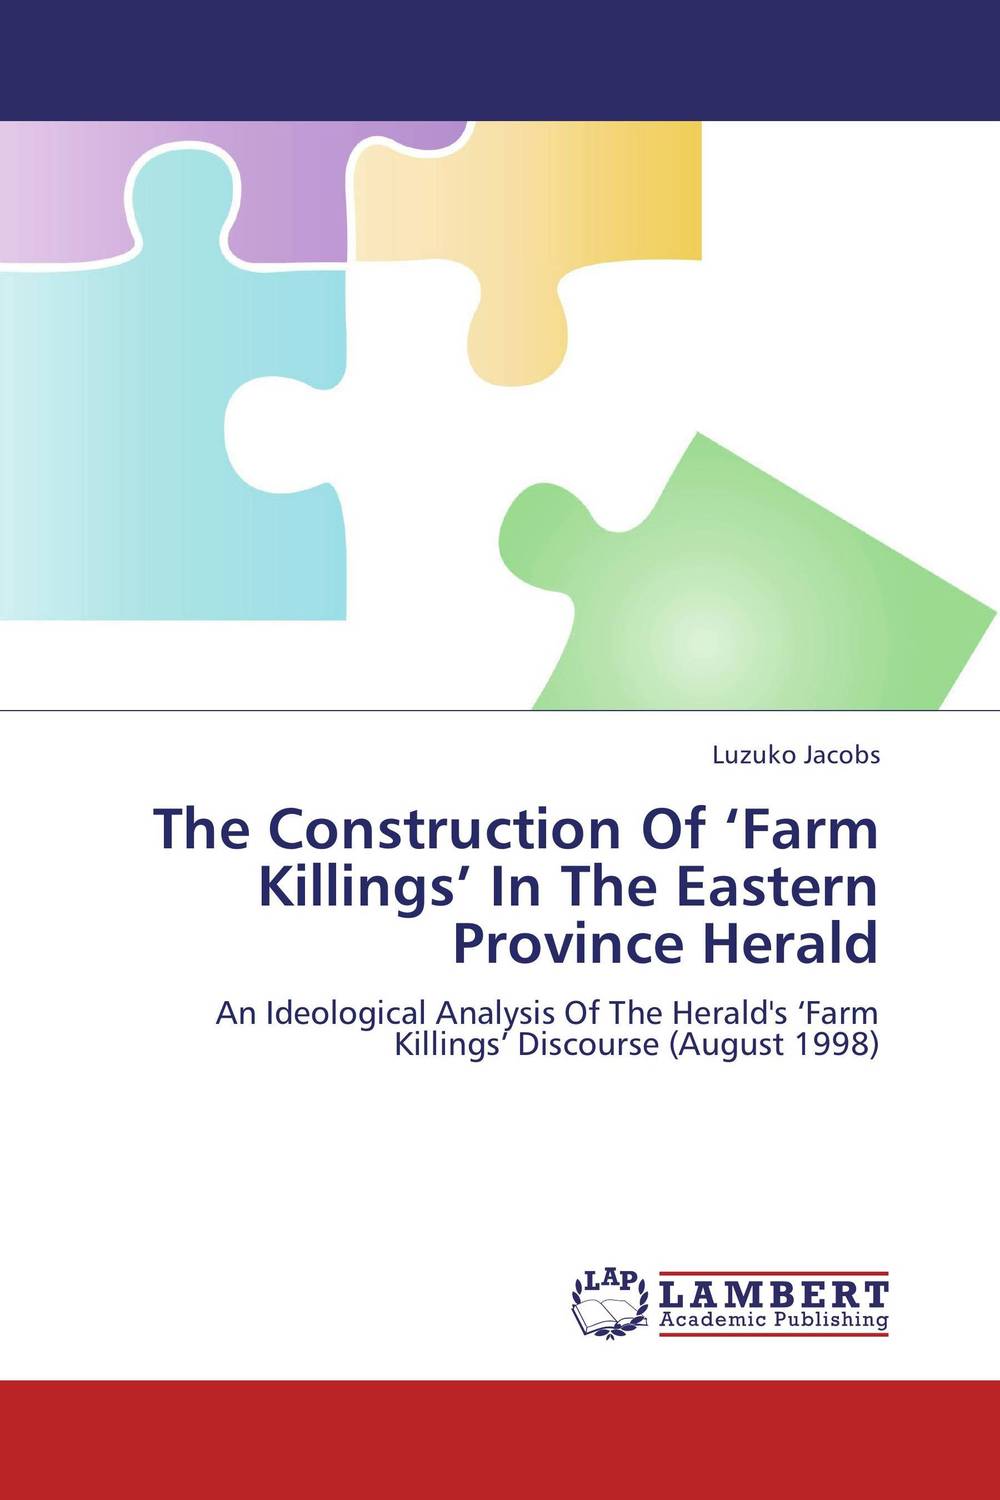 The Construction Of ‘Farm Killings’ In The Eastern Province Herald